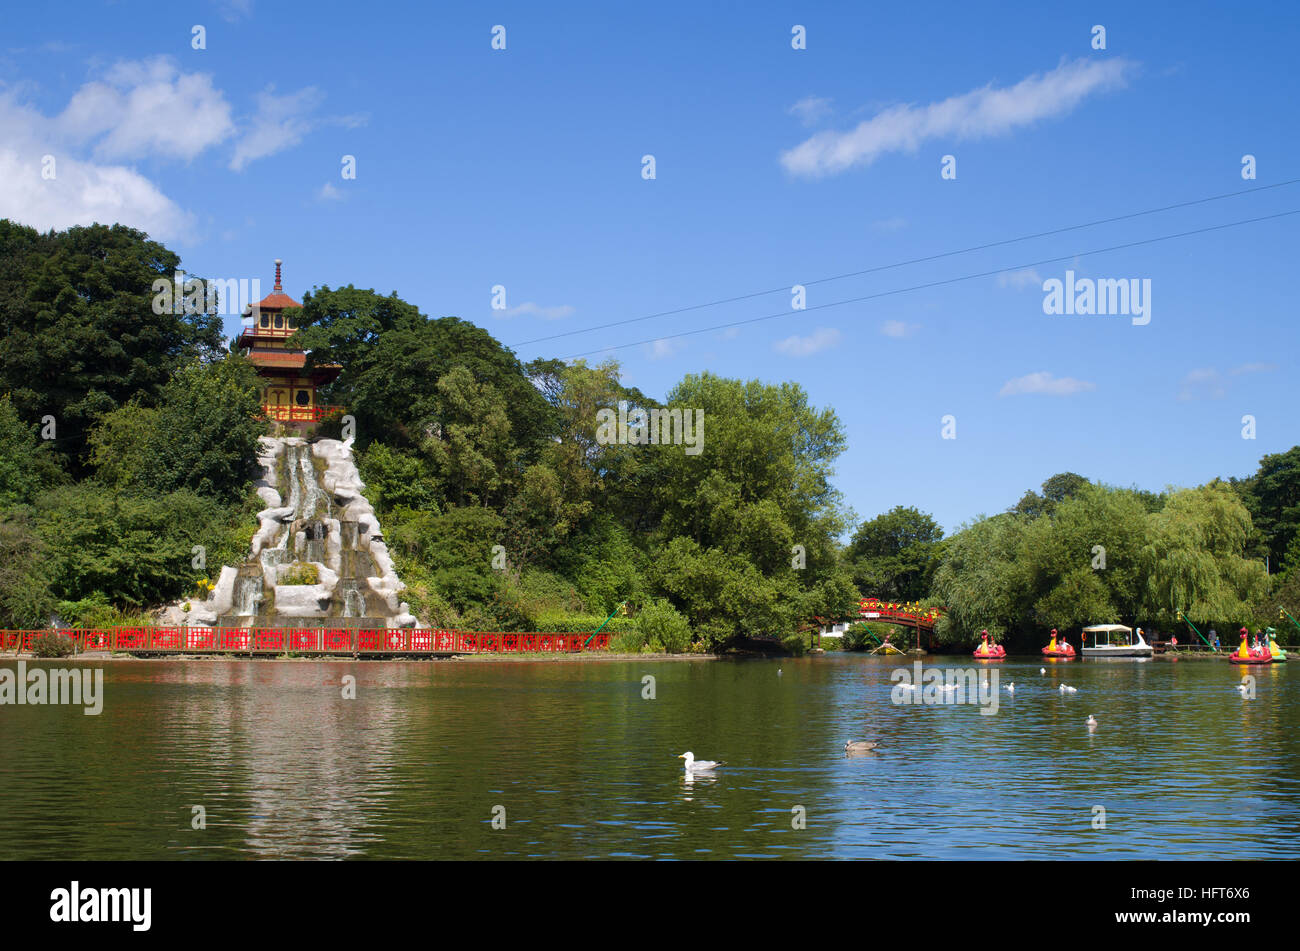 Boating Lake with Island Peasholm Park Scarborough UK.  Tourist attraction Stock Photo